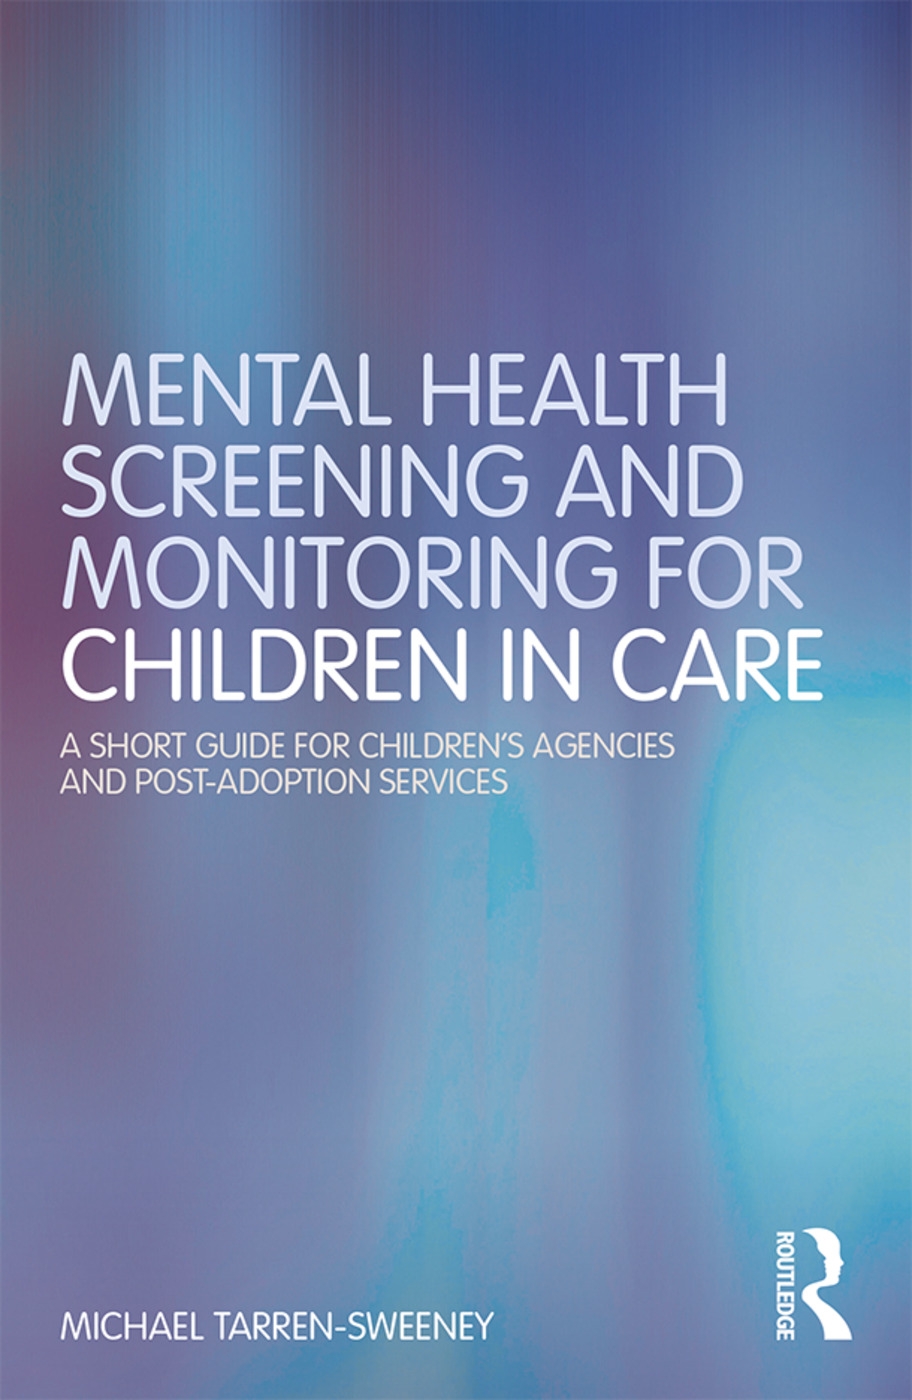 Mental Health Screening and Monitoring for Children in Care: A Short Guide for Children’s Agencies and Post-adoption Services